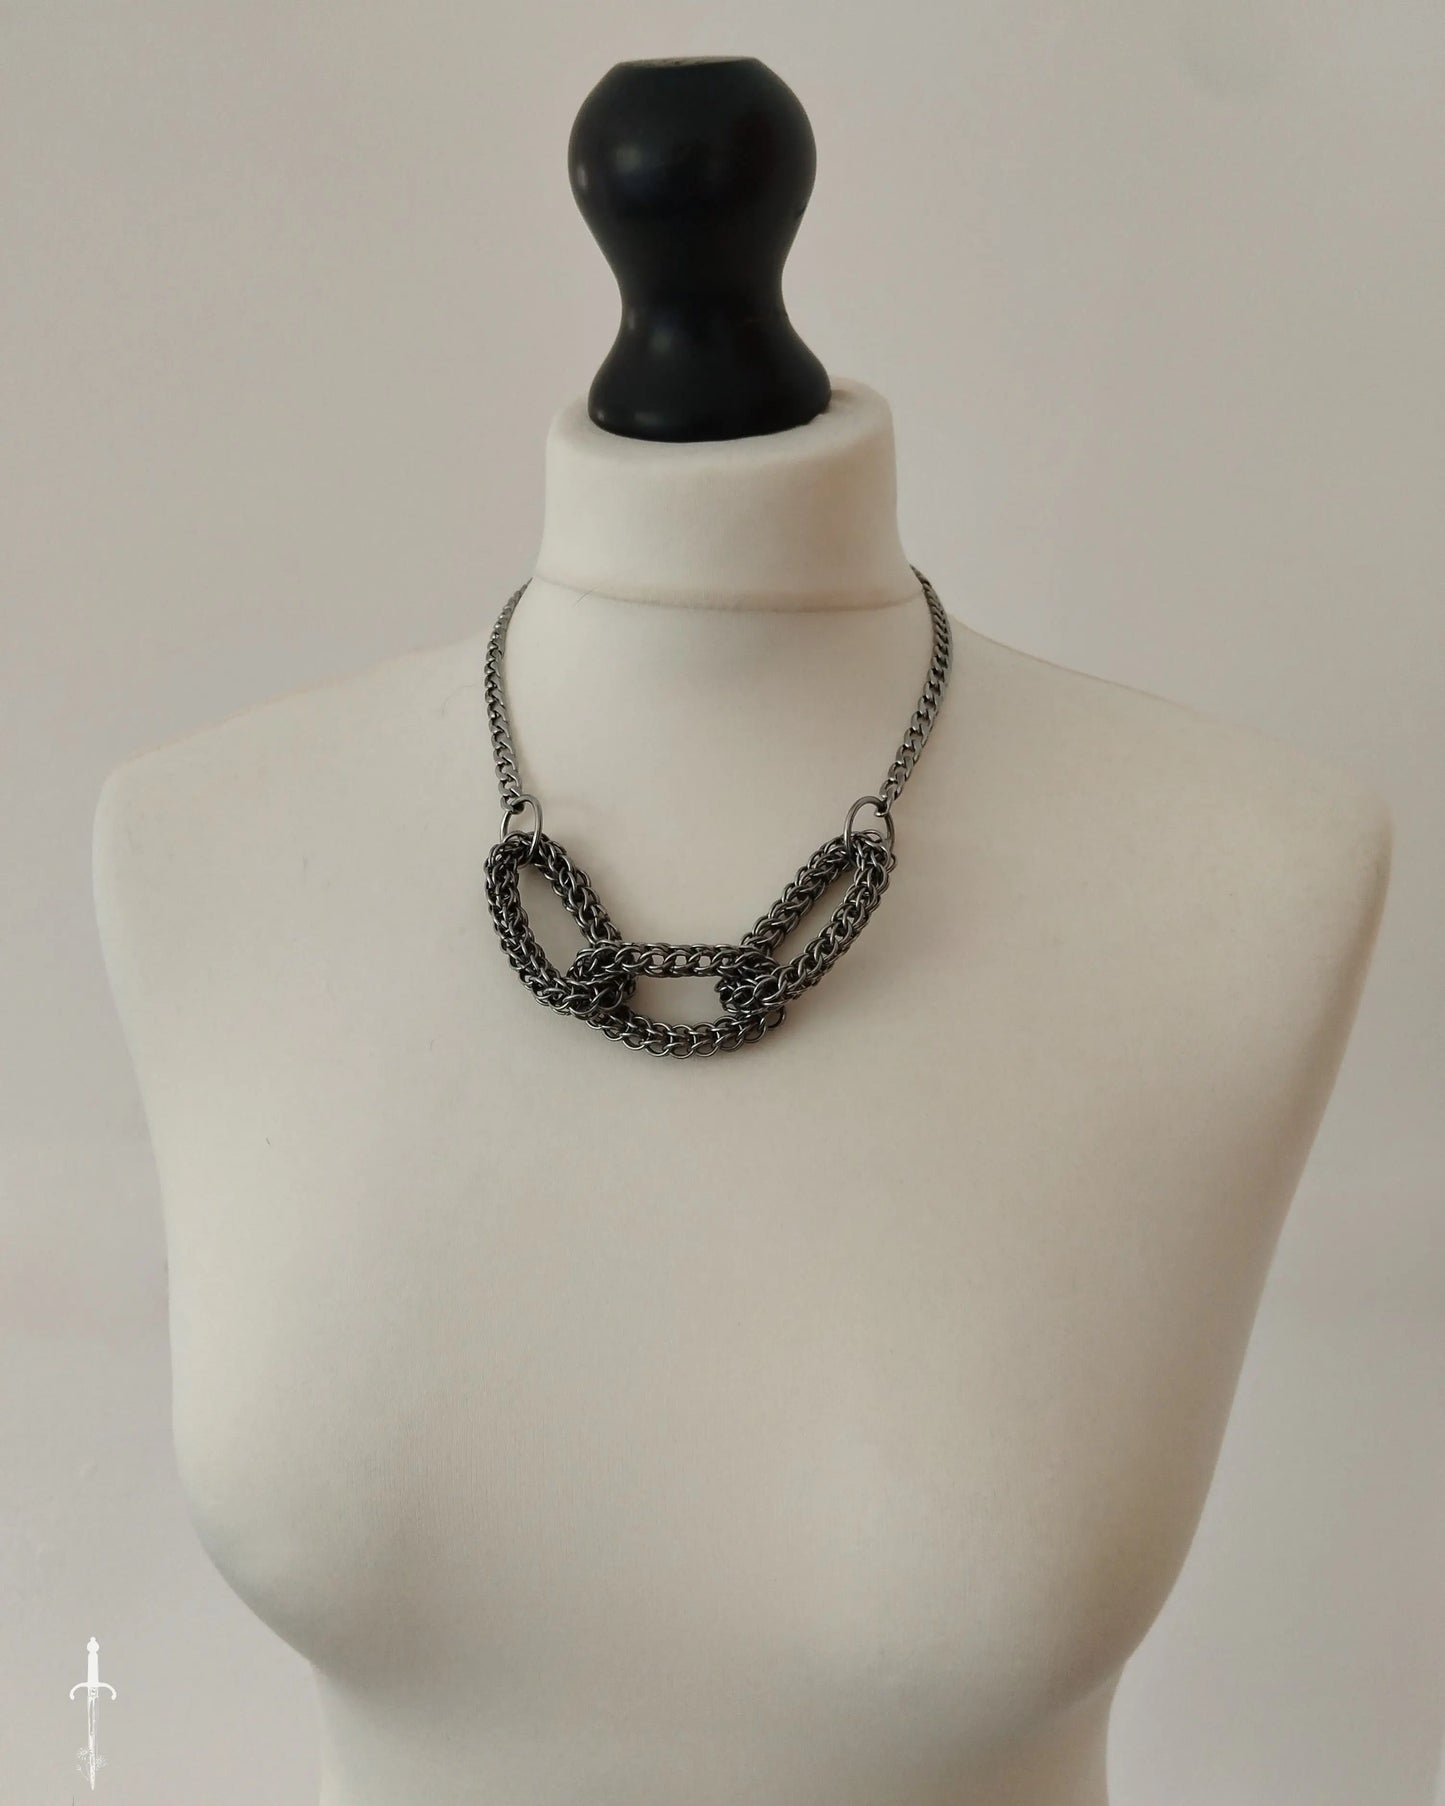 The Trinity Knot Chainmail Statement Necklace in Stainless Steel